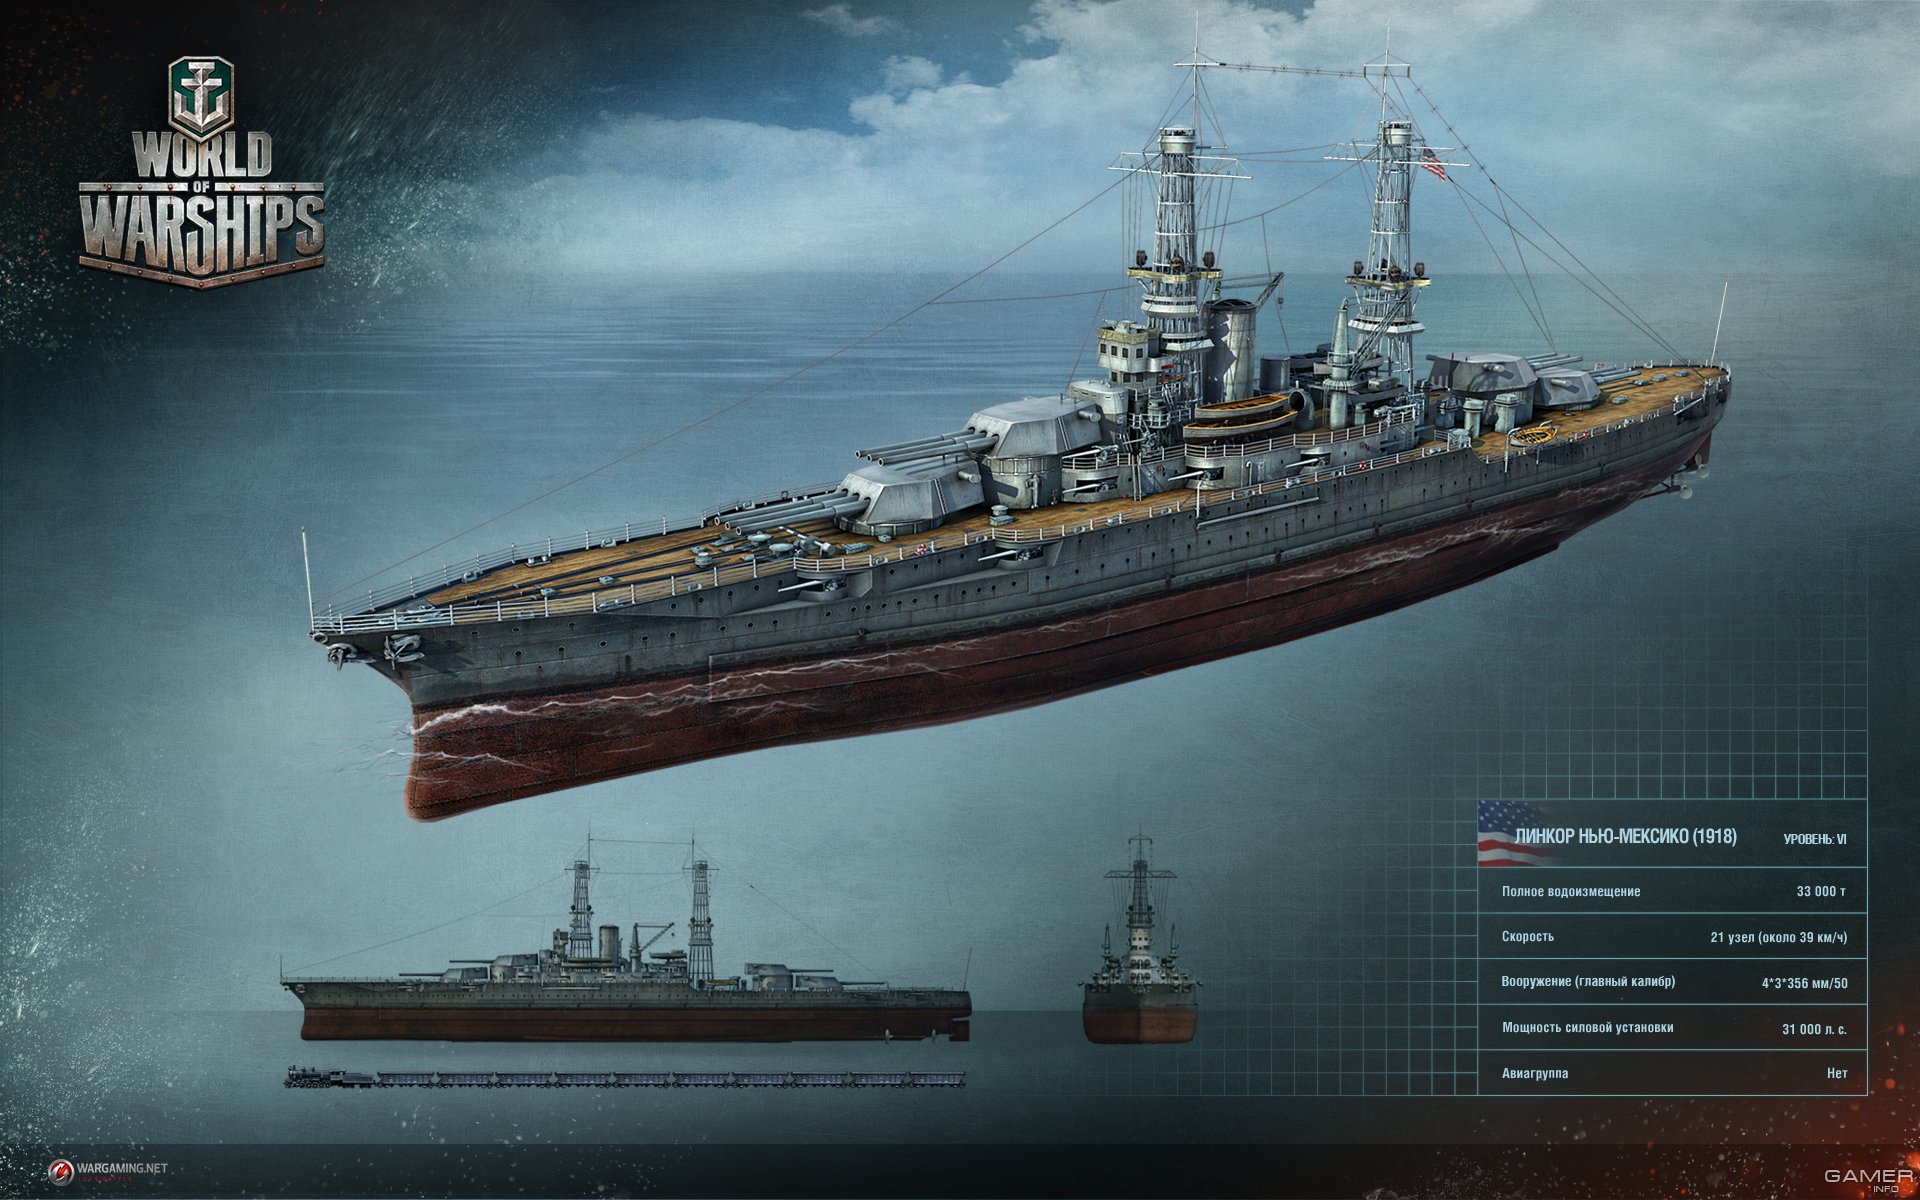 world of warships 12/25/18 login issues